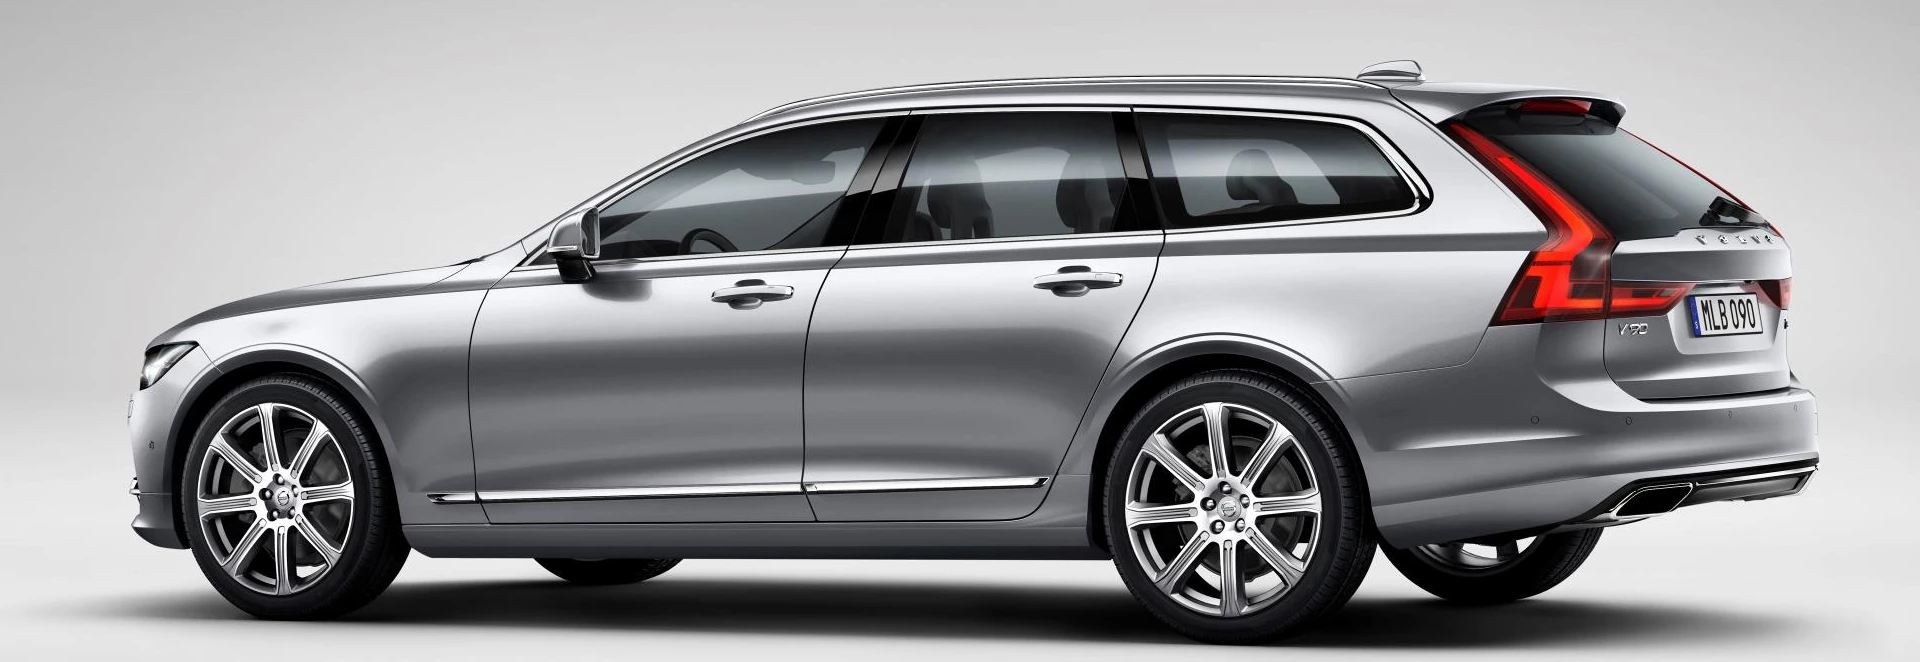 First official images of the Volvo V90 unveiled 